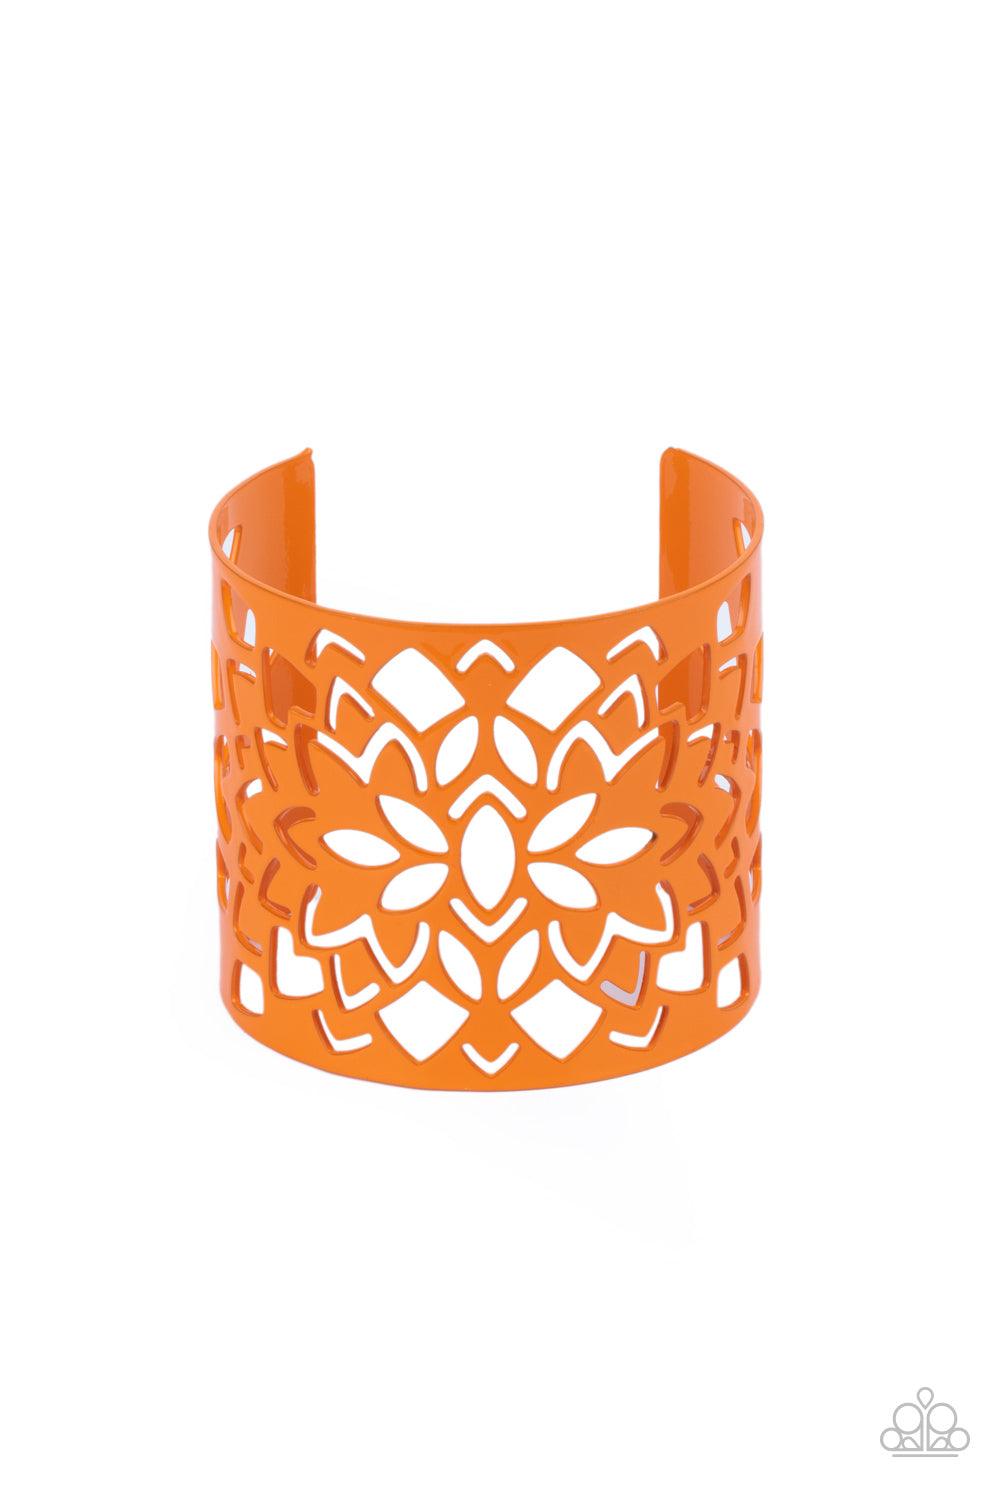 Paparazzi Accessories Hacienda Hotspot - Orange Featuring an airy floral stenciled design, a flamboyant orange cuff wraps around the wrist for a vivacious finish. Sold as one individual bracelet. Jewelry